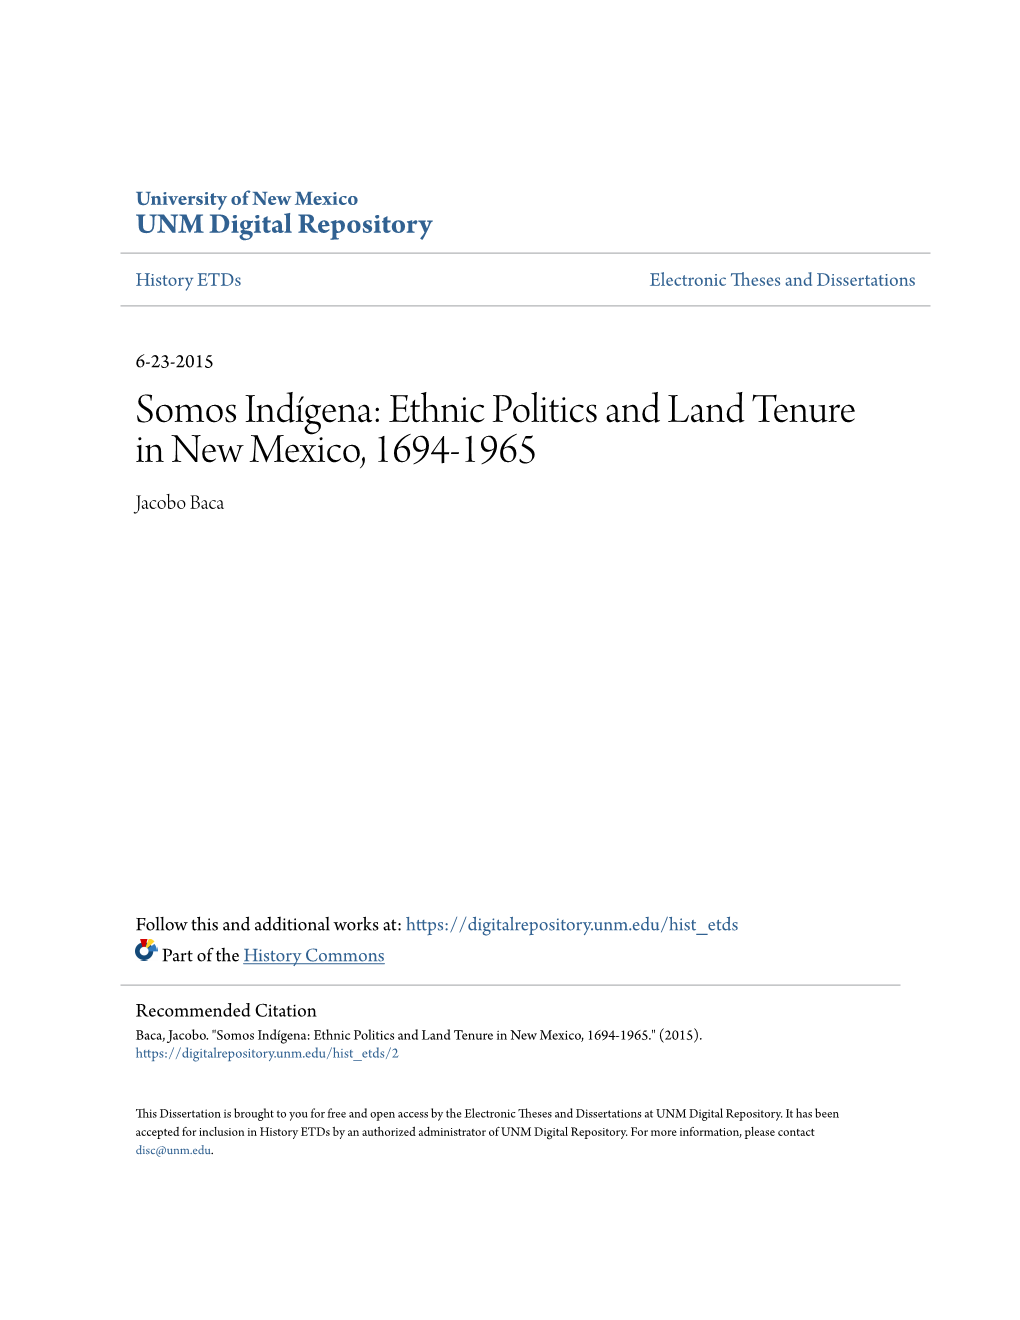 Ethnic Politics and Land Tenure in New Mexico, 1694-1965 Jacobo Baca